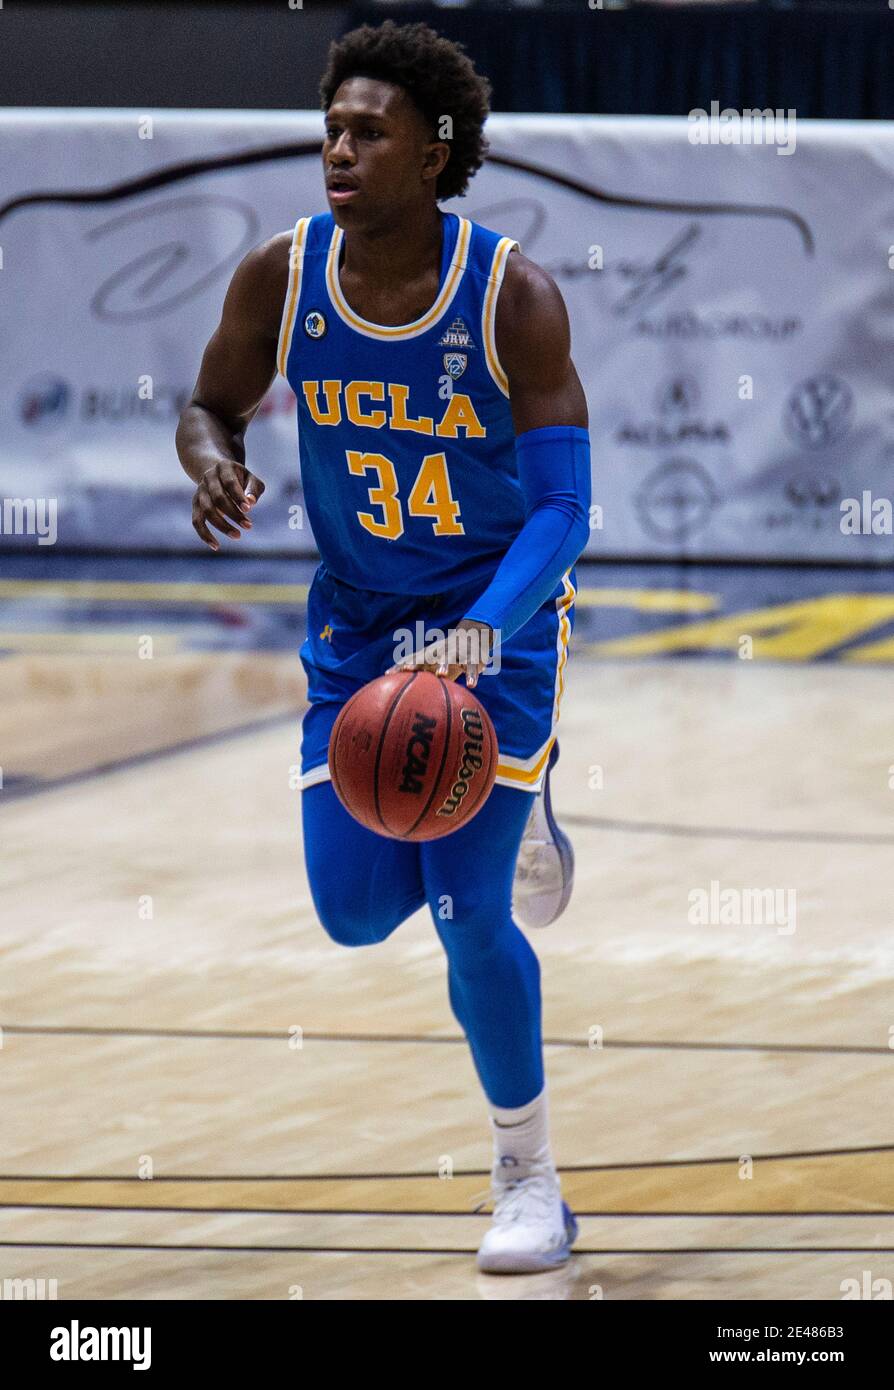 Hass Pavilion Berkeley Calif Usa 21st Jan 2021 Ca U S A Ucla Bruins Guard David Singleton 34 Brings The Ball Up Court During The Ncaa Men S Basketball Game Between Ucla Bruins And The